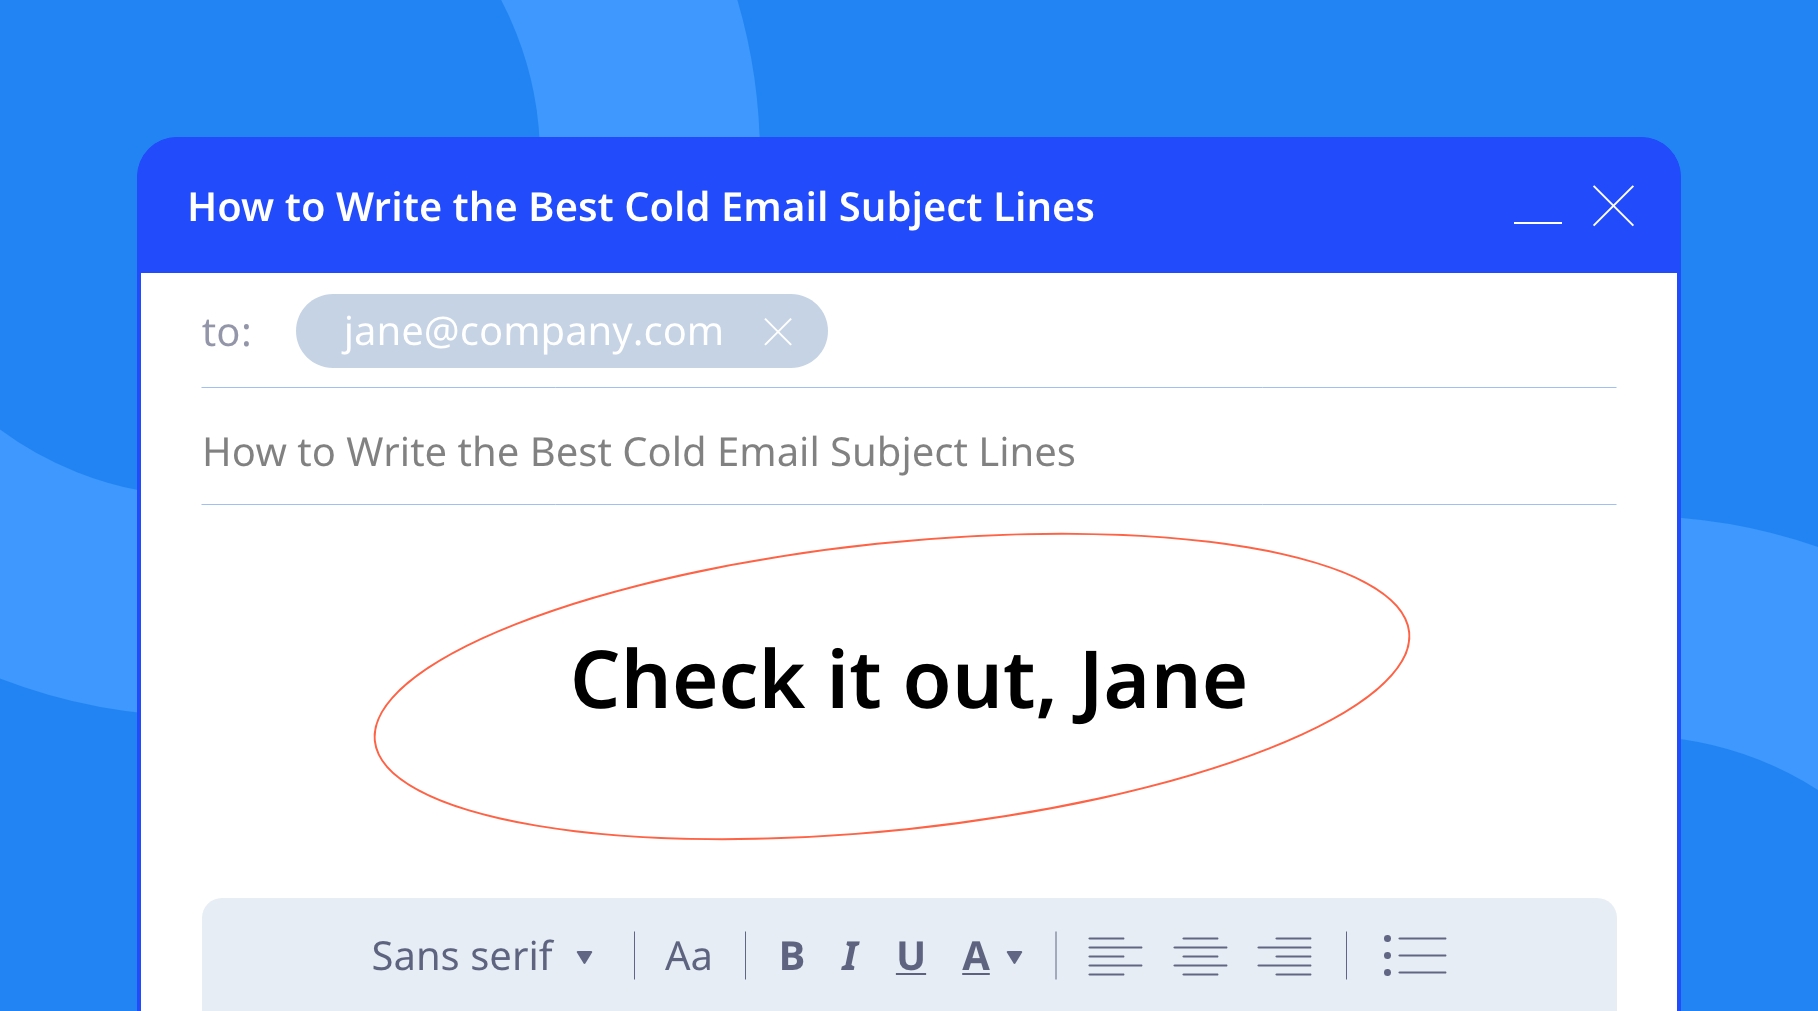 An email pop-up window with a cold email subject line: "Check it out, Jane".